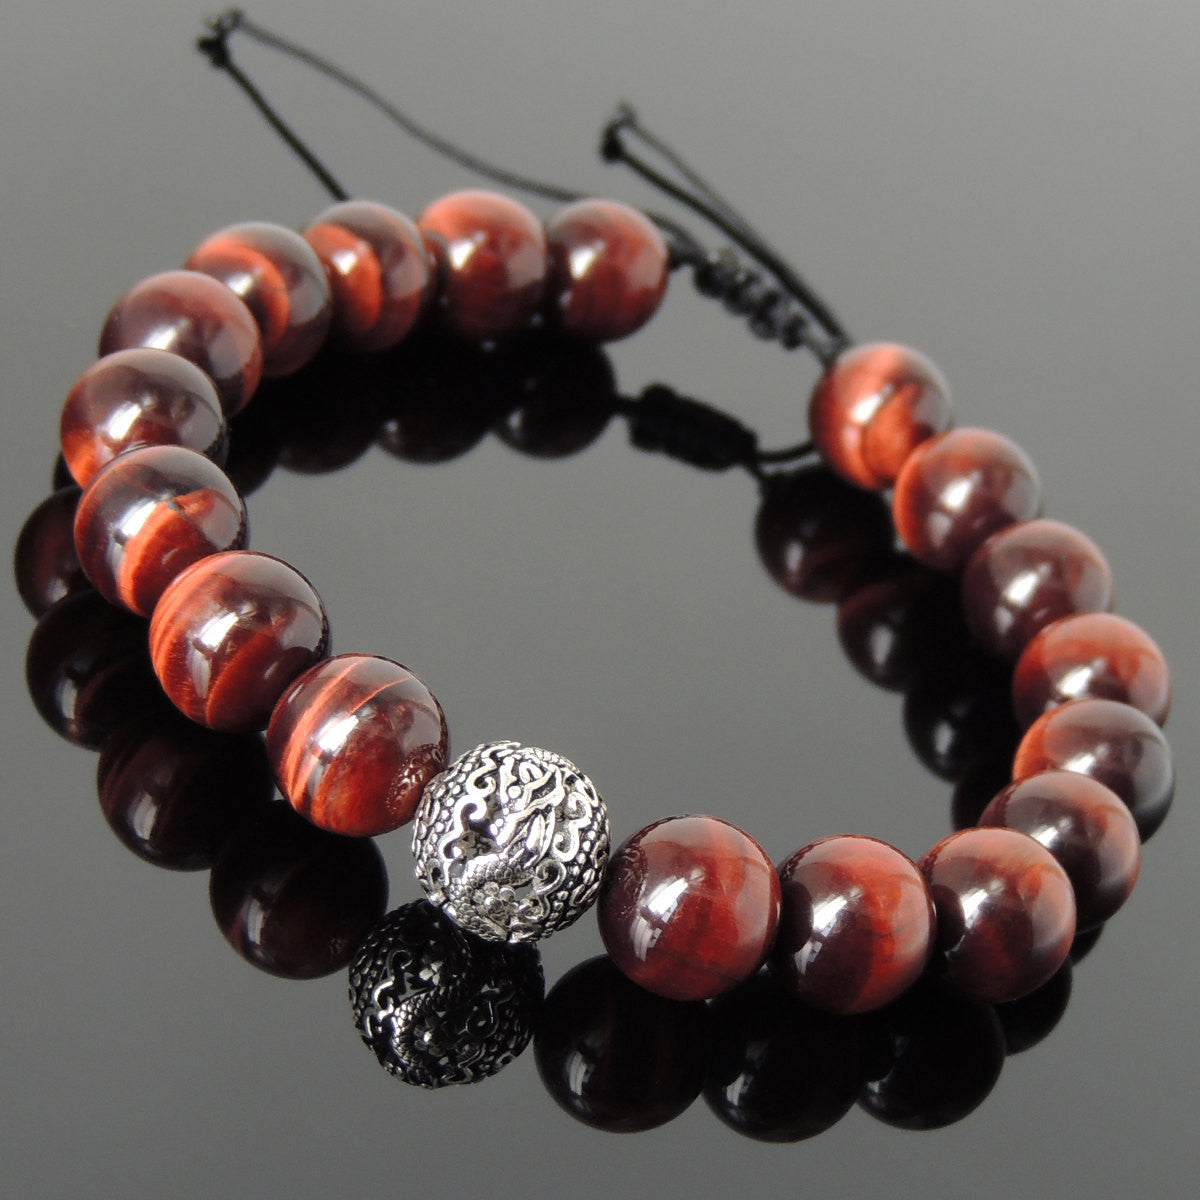 Healing High Quality Red Tiger Eye Gemstones, Non-Plated Sterling Silver Elegantly Carved Dragon Bead, Handmade Braided Adjustable Drawstring Bracelet, Symbol of protection, courage, tranquility, strength, love, spirituality